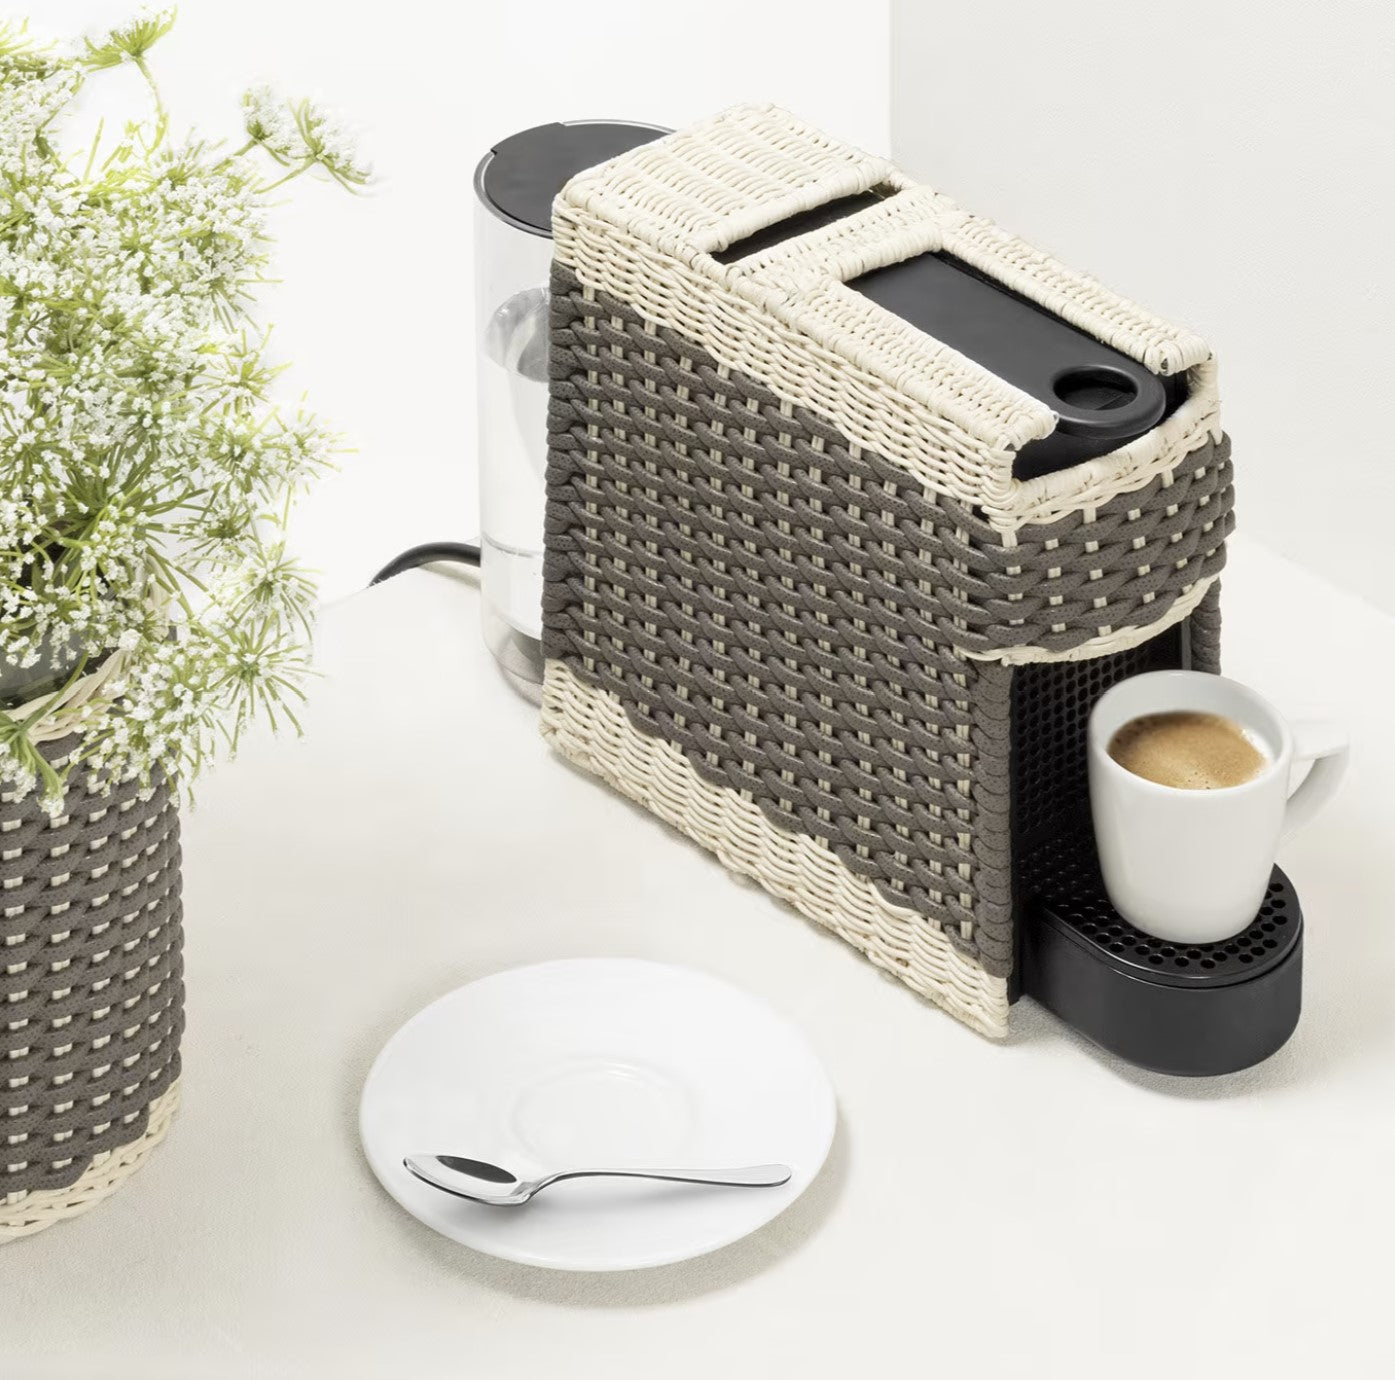 GIOBAGNARA - ESSENZA BROWN LEATHER & RATTAN COFFEE MACHINE WITH COVER $1,240.00